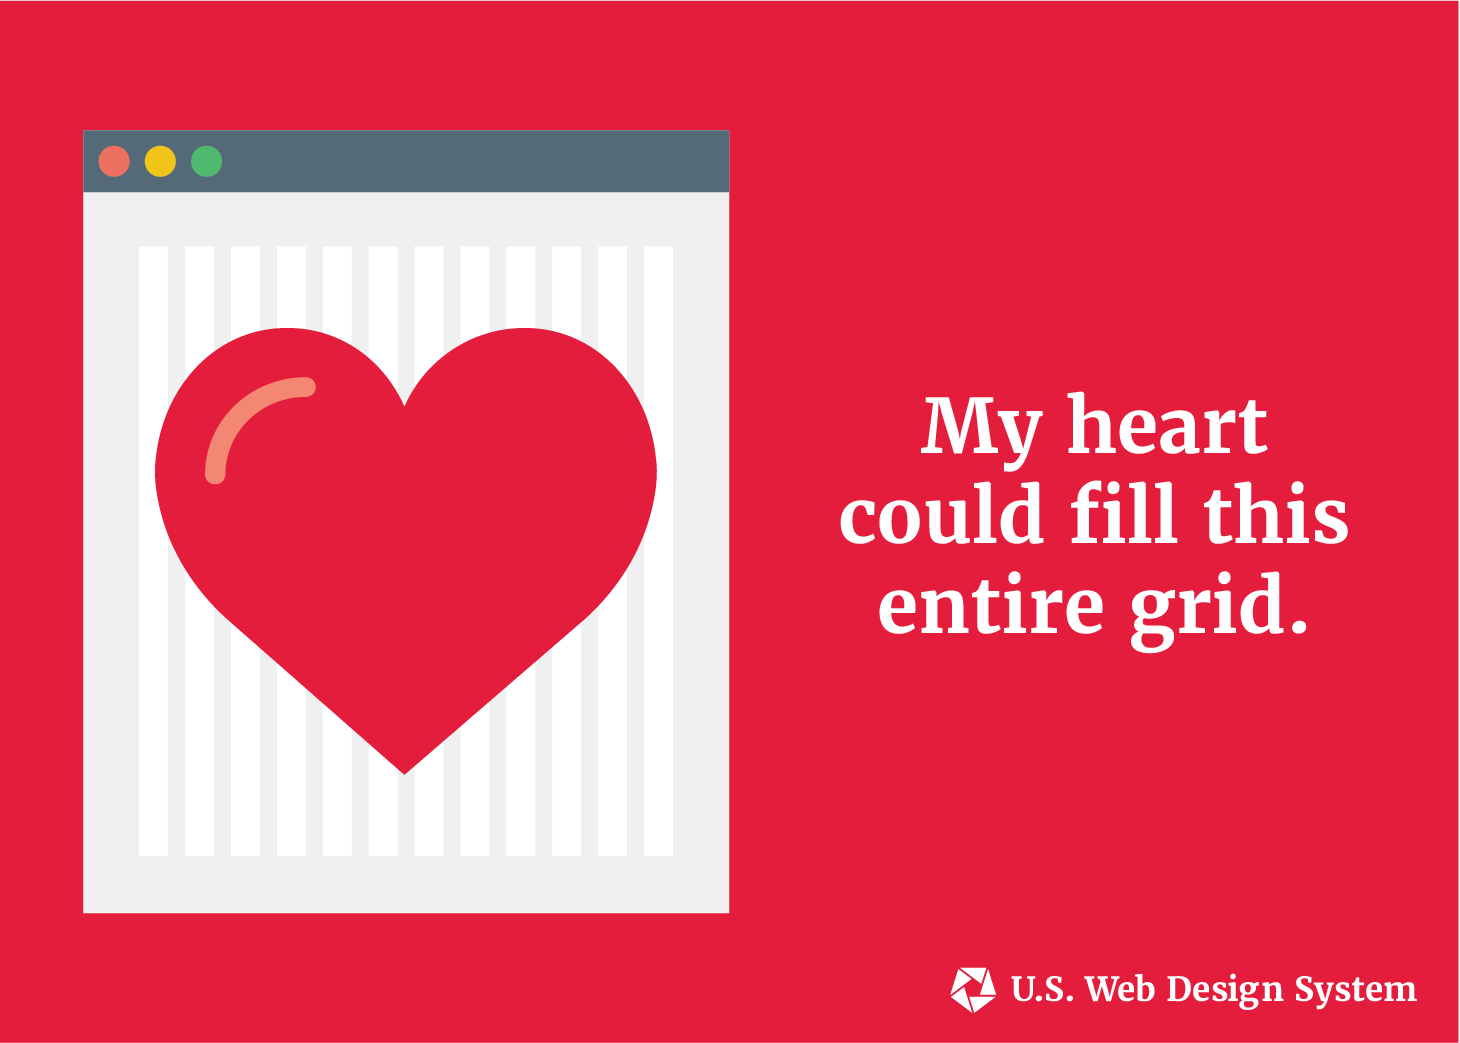 A browser window showing a heart filling up the entire USWDS grid